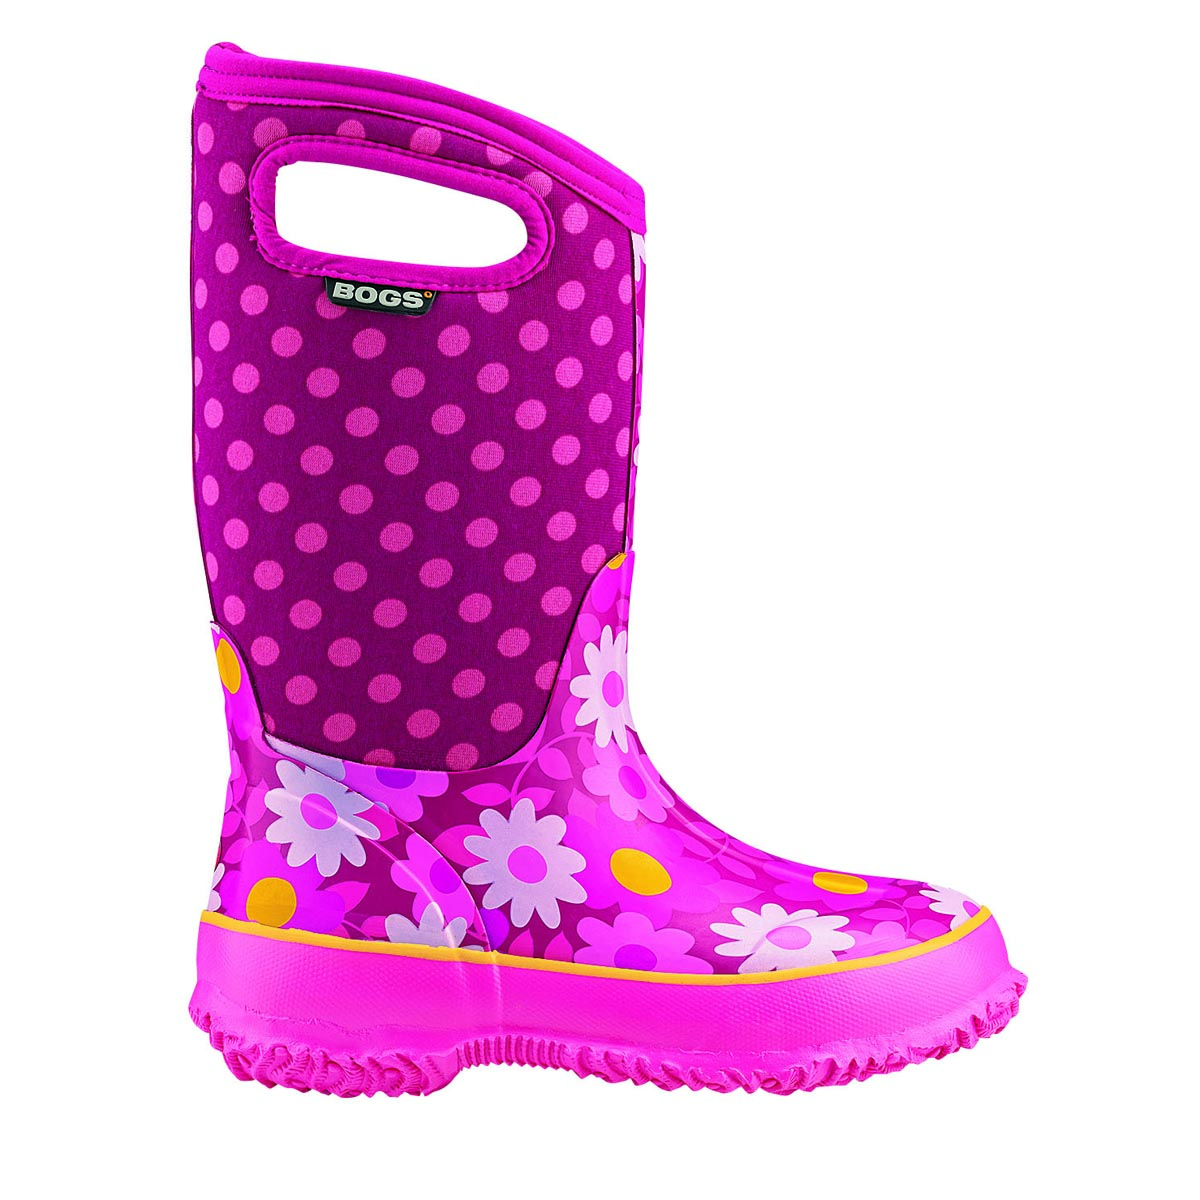 Bogs Youth Girls Classic Flower Dots Sizes 1 7